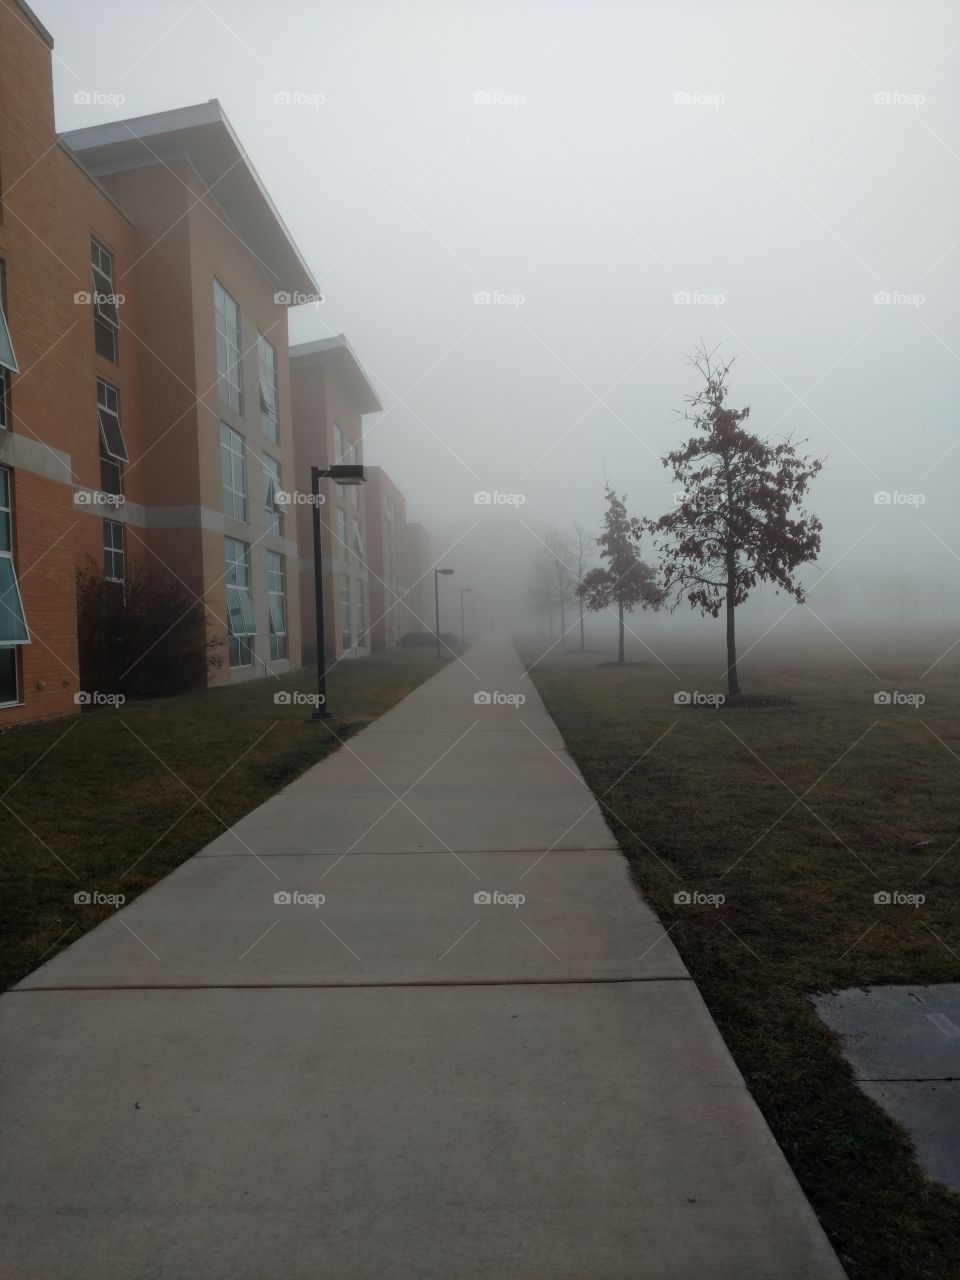 Foggy morning walking on sidewalk by trees and dorm buildings